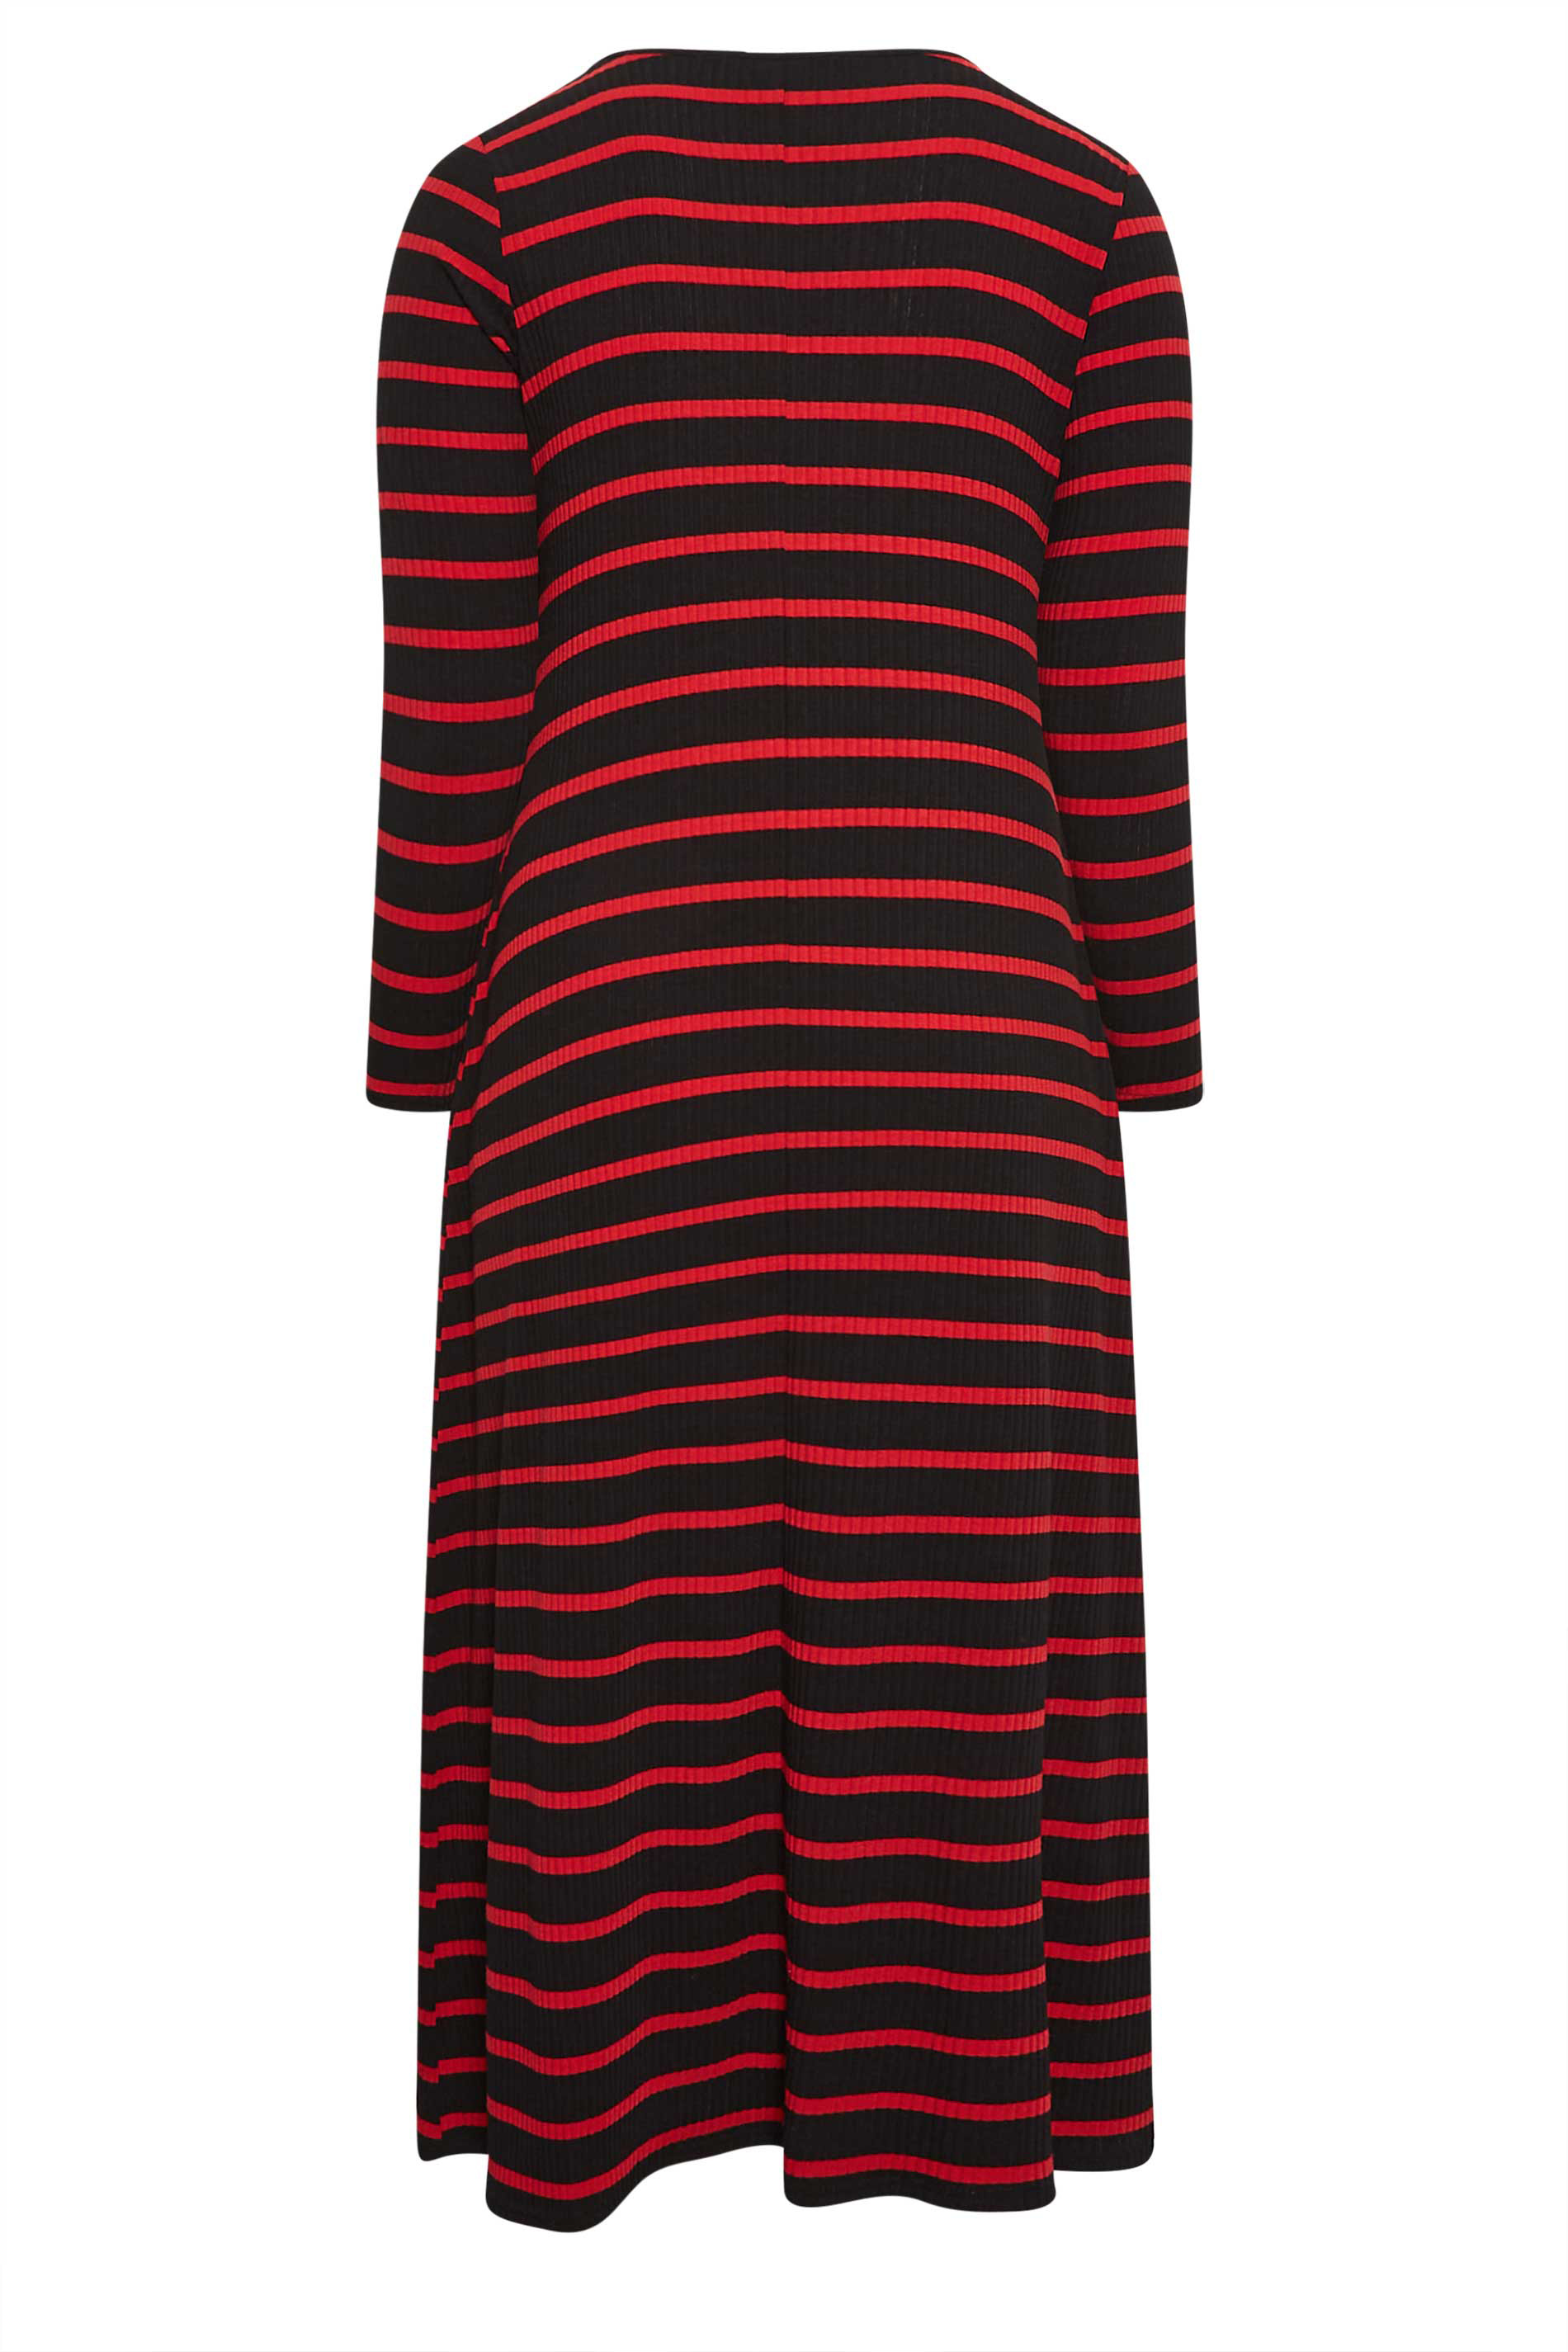 YOURS Curve Red Long Yours Striped Clothing Ribbed Swing Maxi | Dress Sleeve